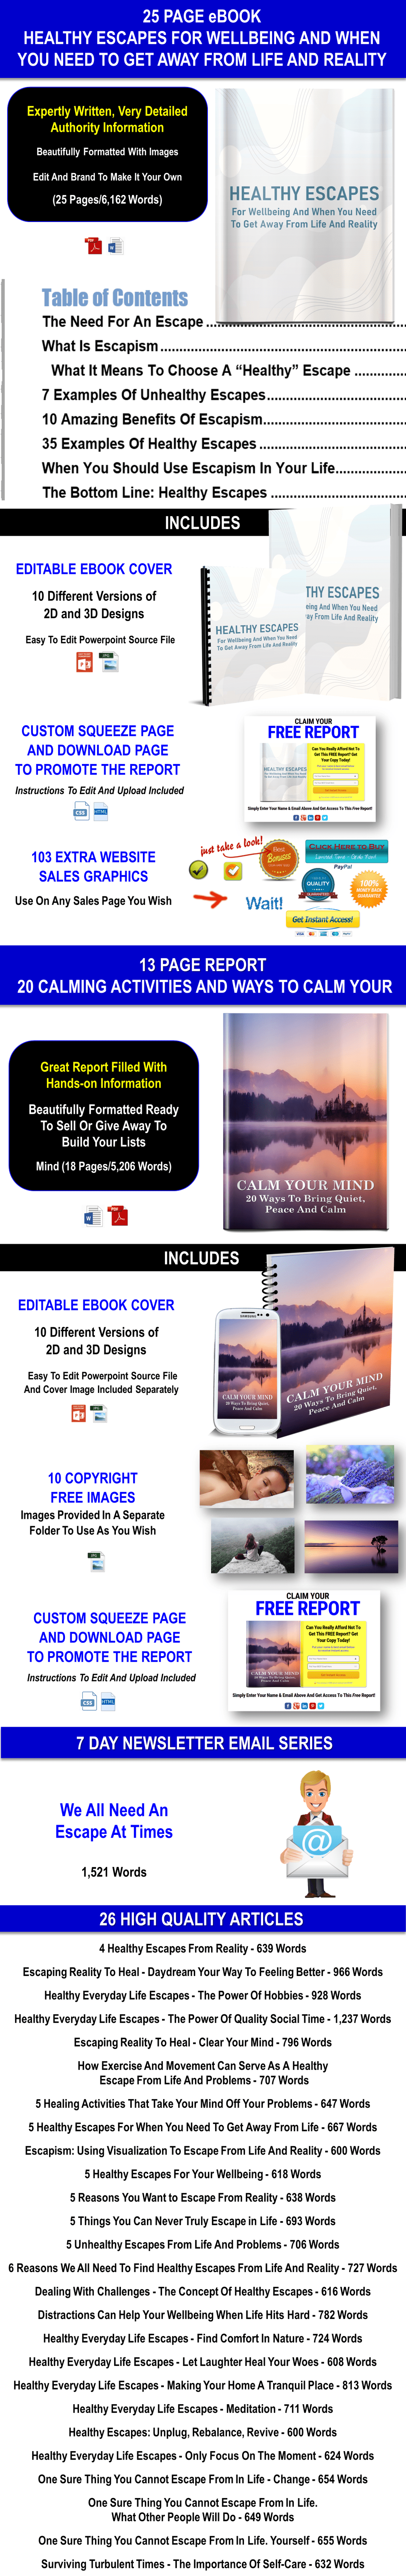 Escapism: Healthy Escapes For Wellbeing And When You Need To Get Away From Life Giant PLR